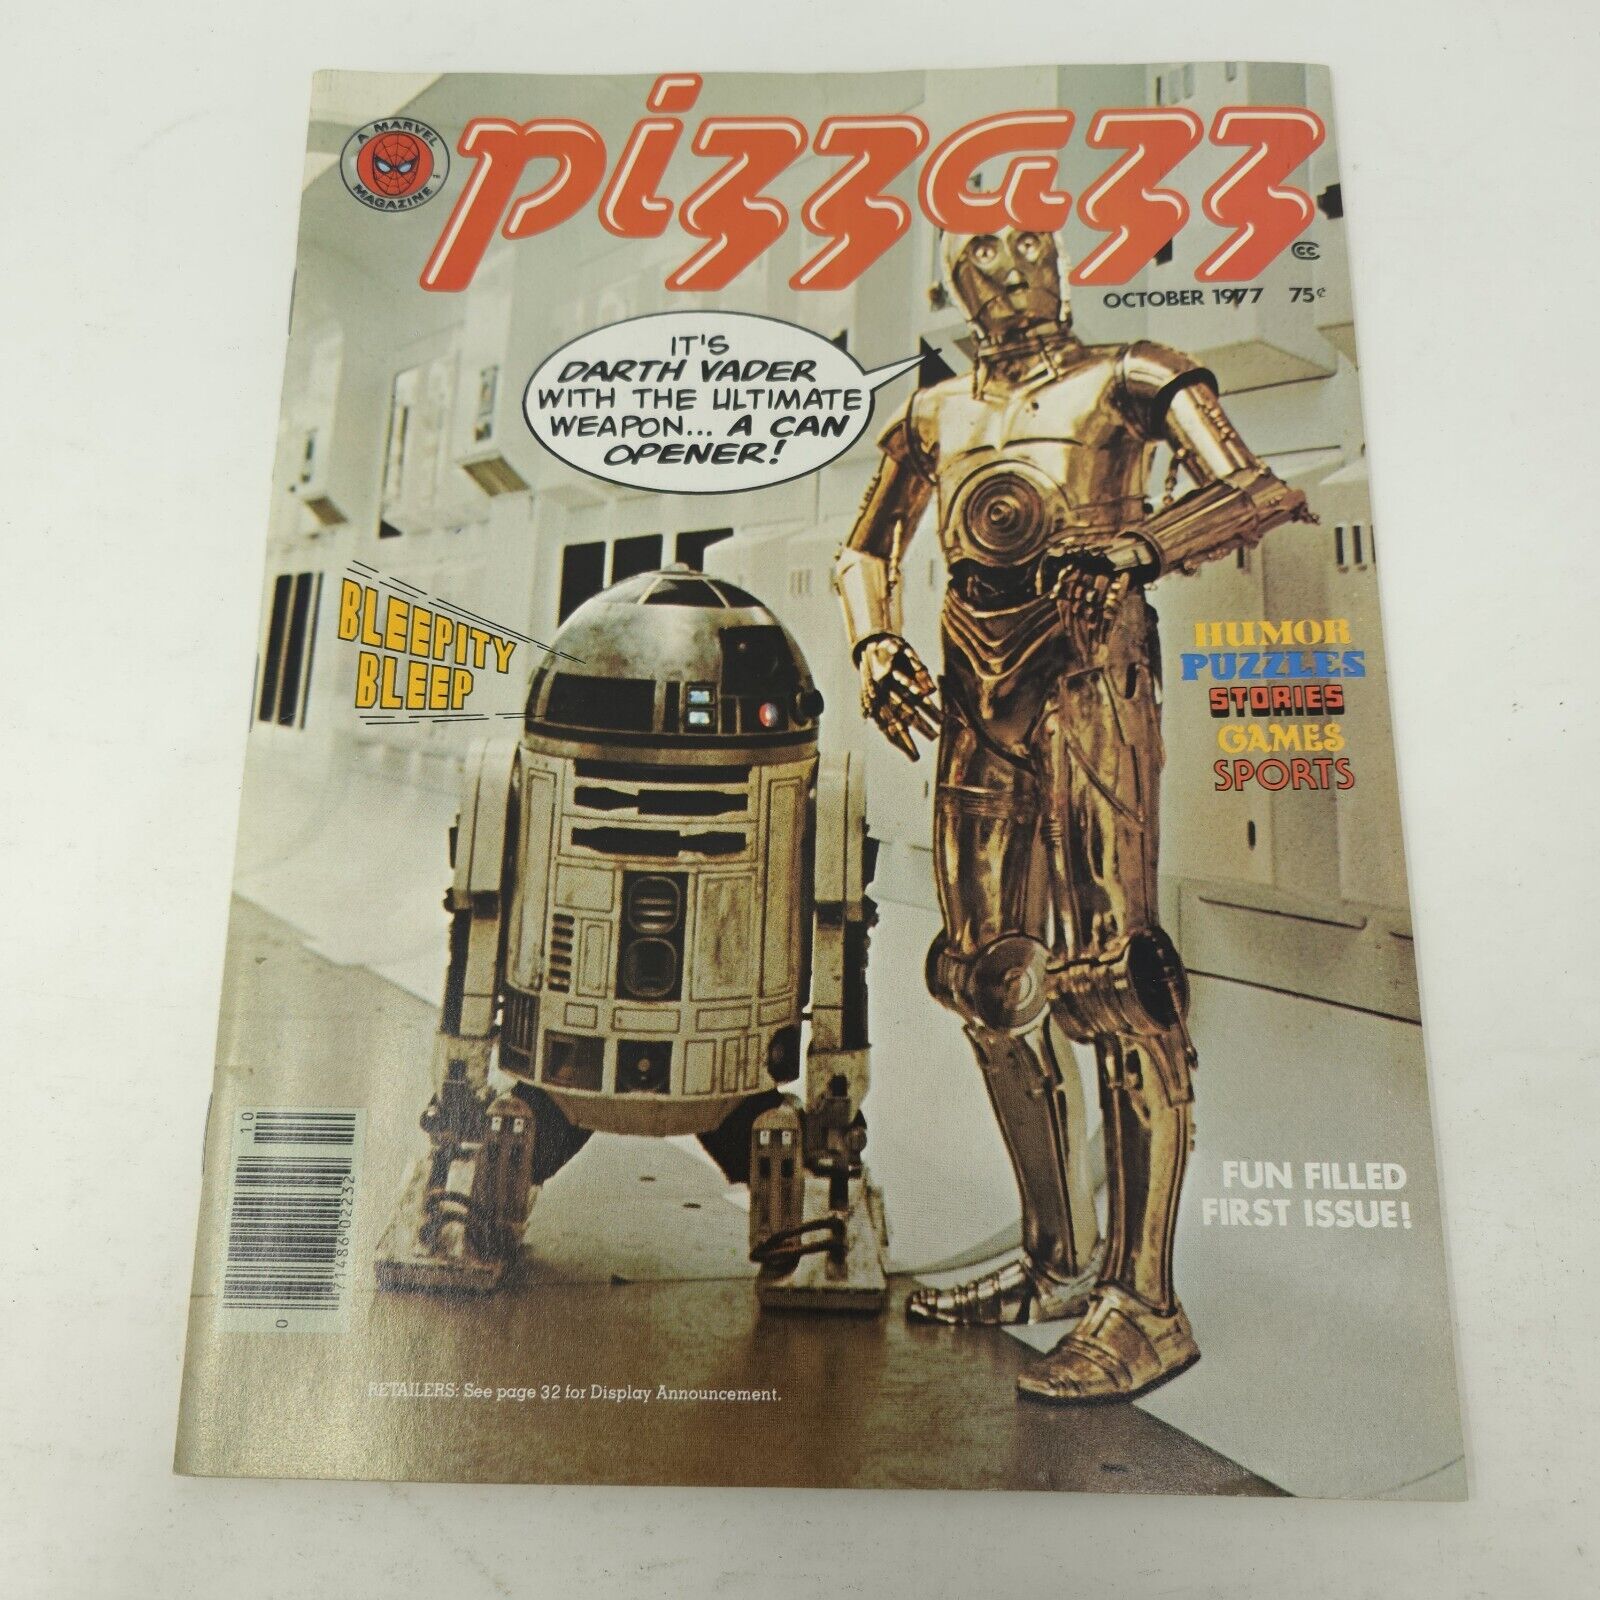 Premiere Edition Of Marvel’s Pizzazz Magazine #1, Star Wars October 1977 VG+